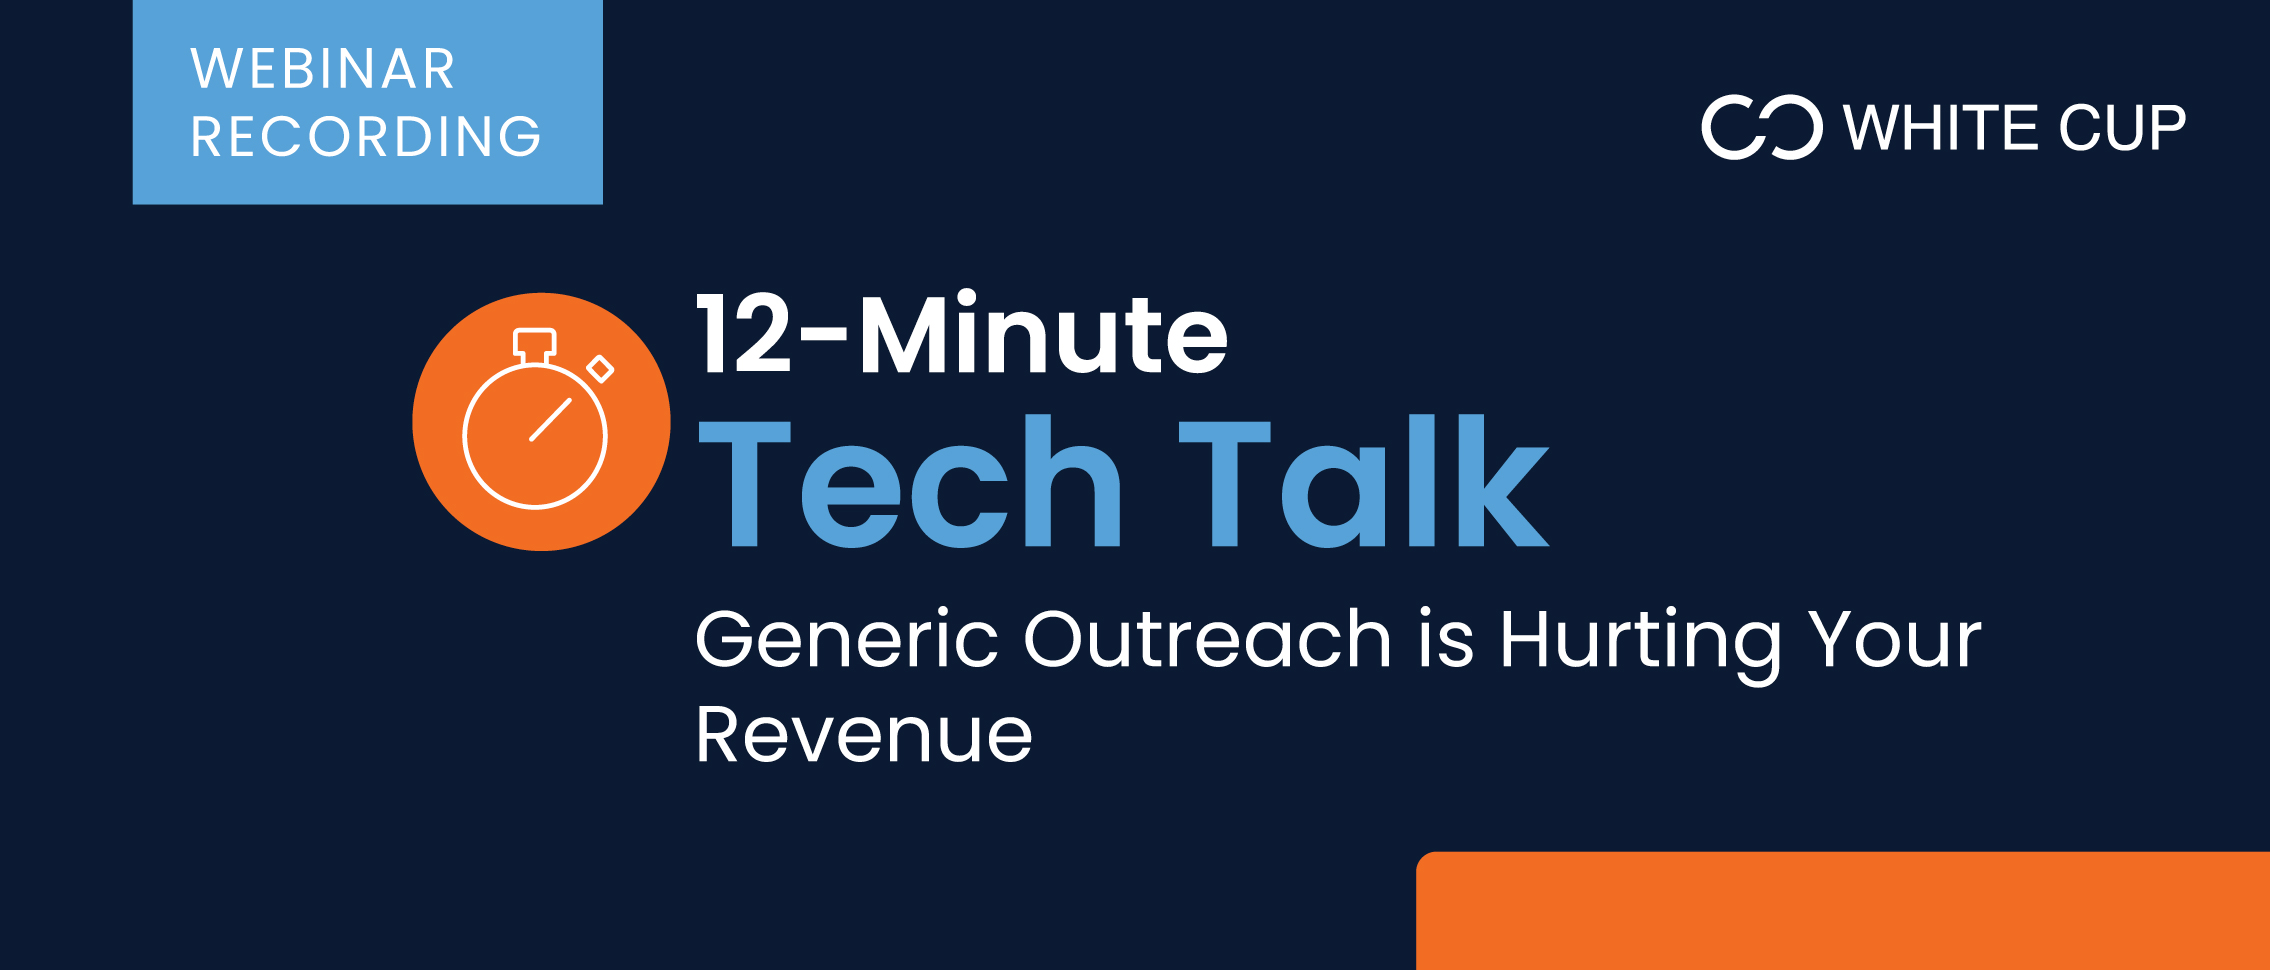 webinar recording of generic outreach is hurting your revenue